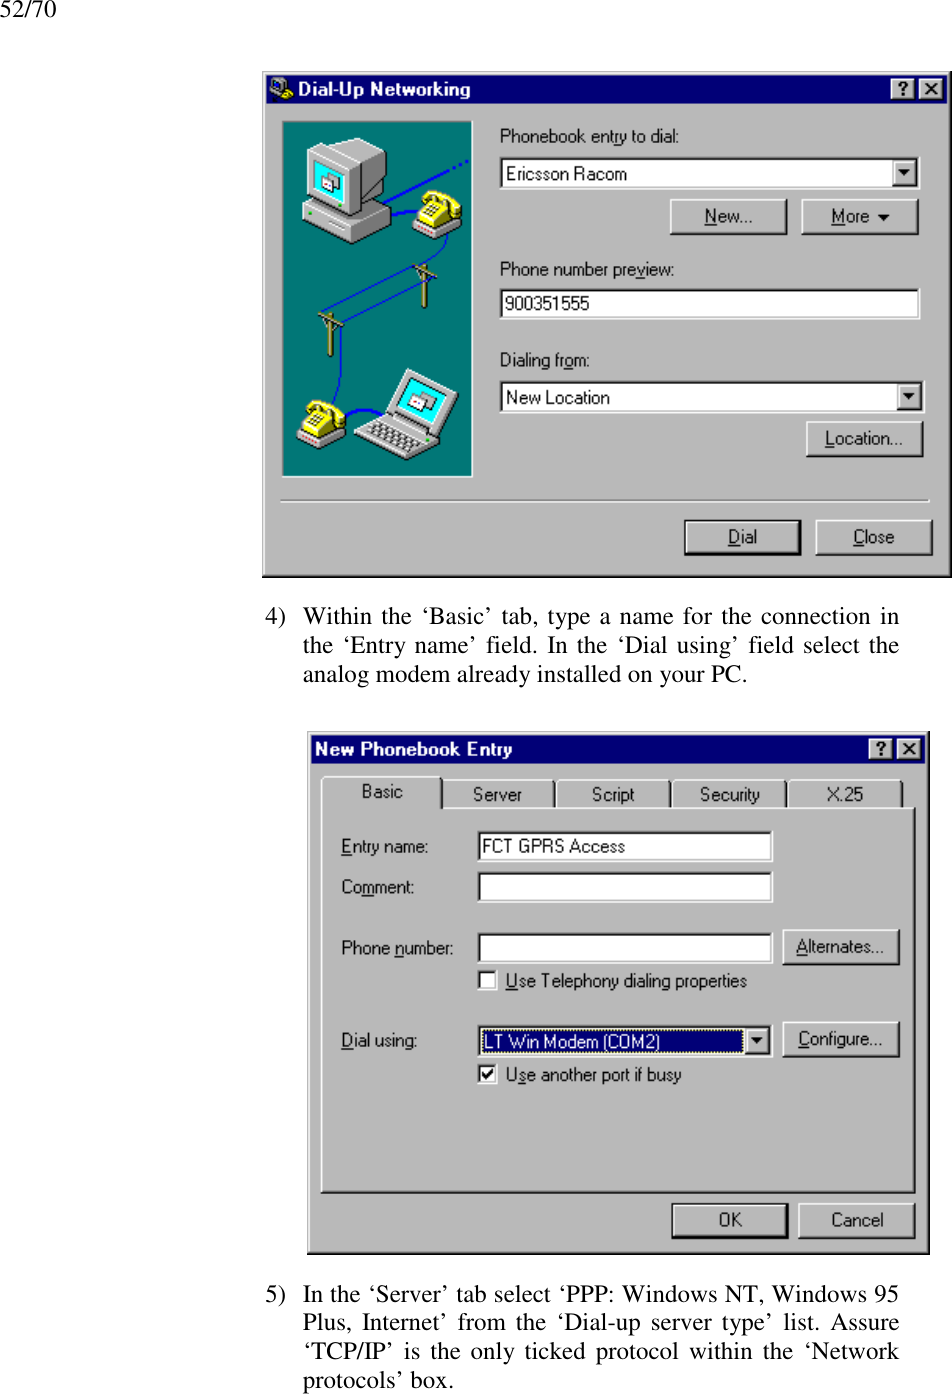 52/704) Within the ‘Basic’ tab, type a name for the connection inthe ‘Entry name’ field. In the ‘Dial using’ field select theanalog modem already installed on your PC.5) In the ‘Server’ tab select ‘PPP: Windows NT, Windows 95Plus, Internet’ from the ‘Dial-up server type’ list. Assure‘TCP/IP’ is the only ticked protocol within the ‘Networkprotocols’ box.